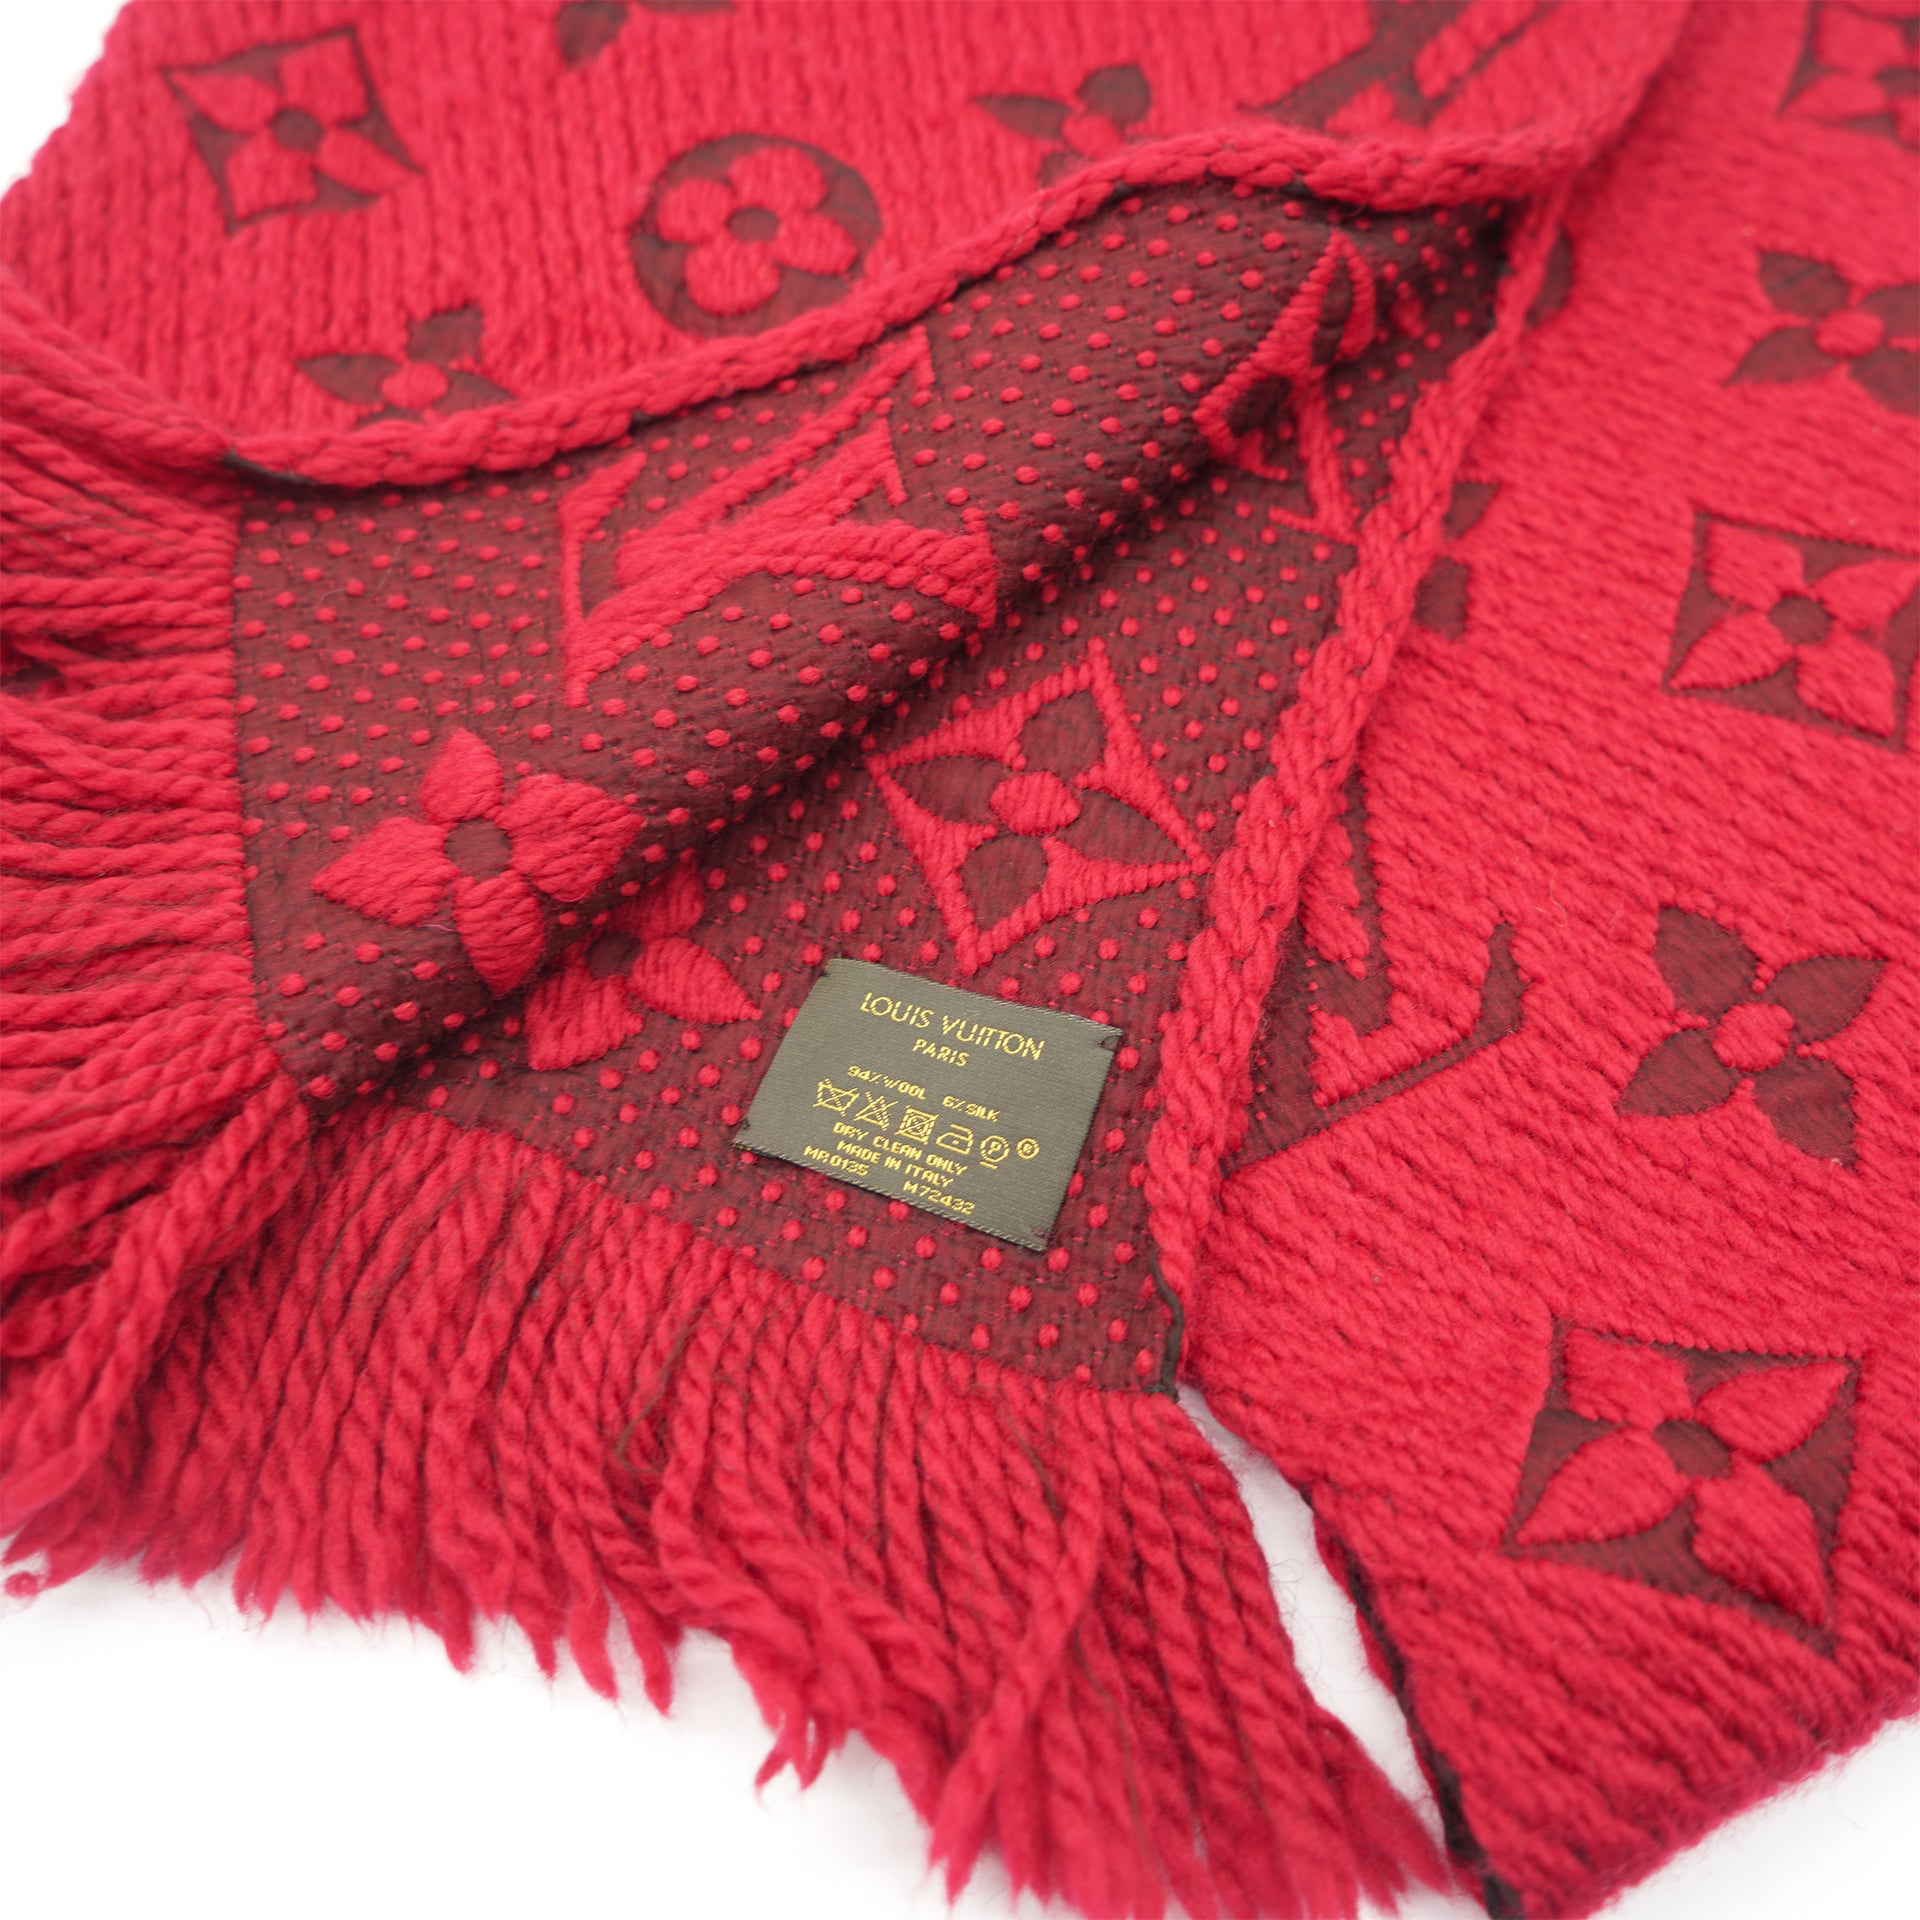 Vintage Brand New Ruby Red Logomania Scarf with Box and Packaging by Louis  Vui, Shop THRILLING